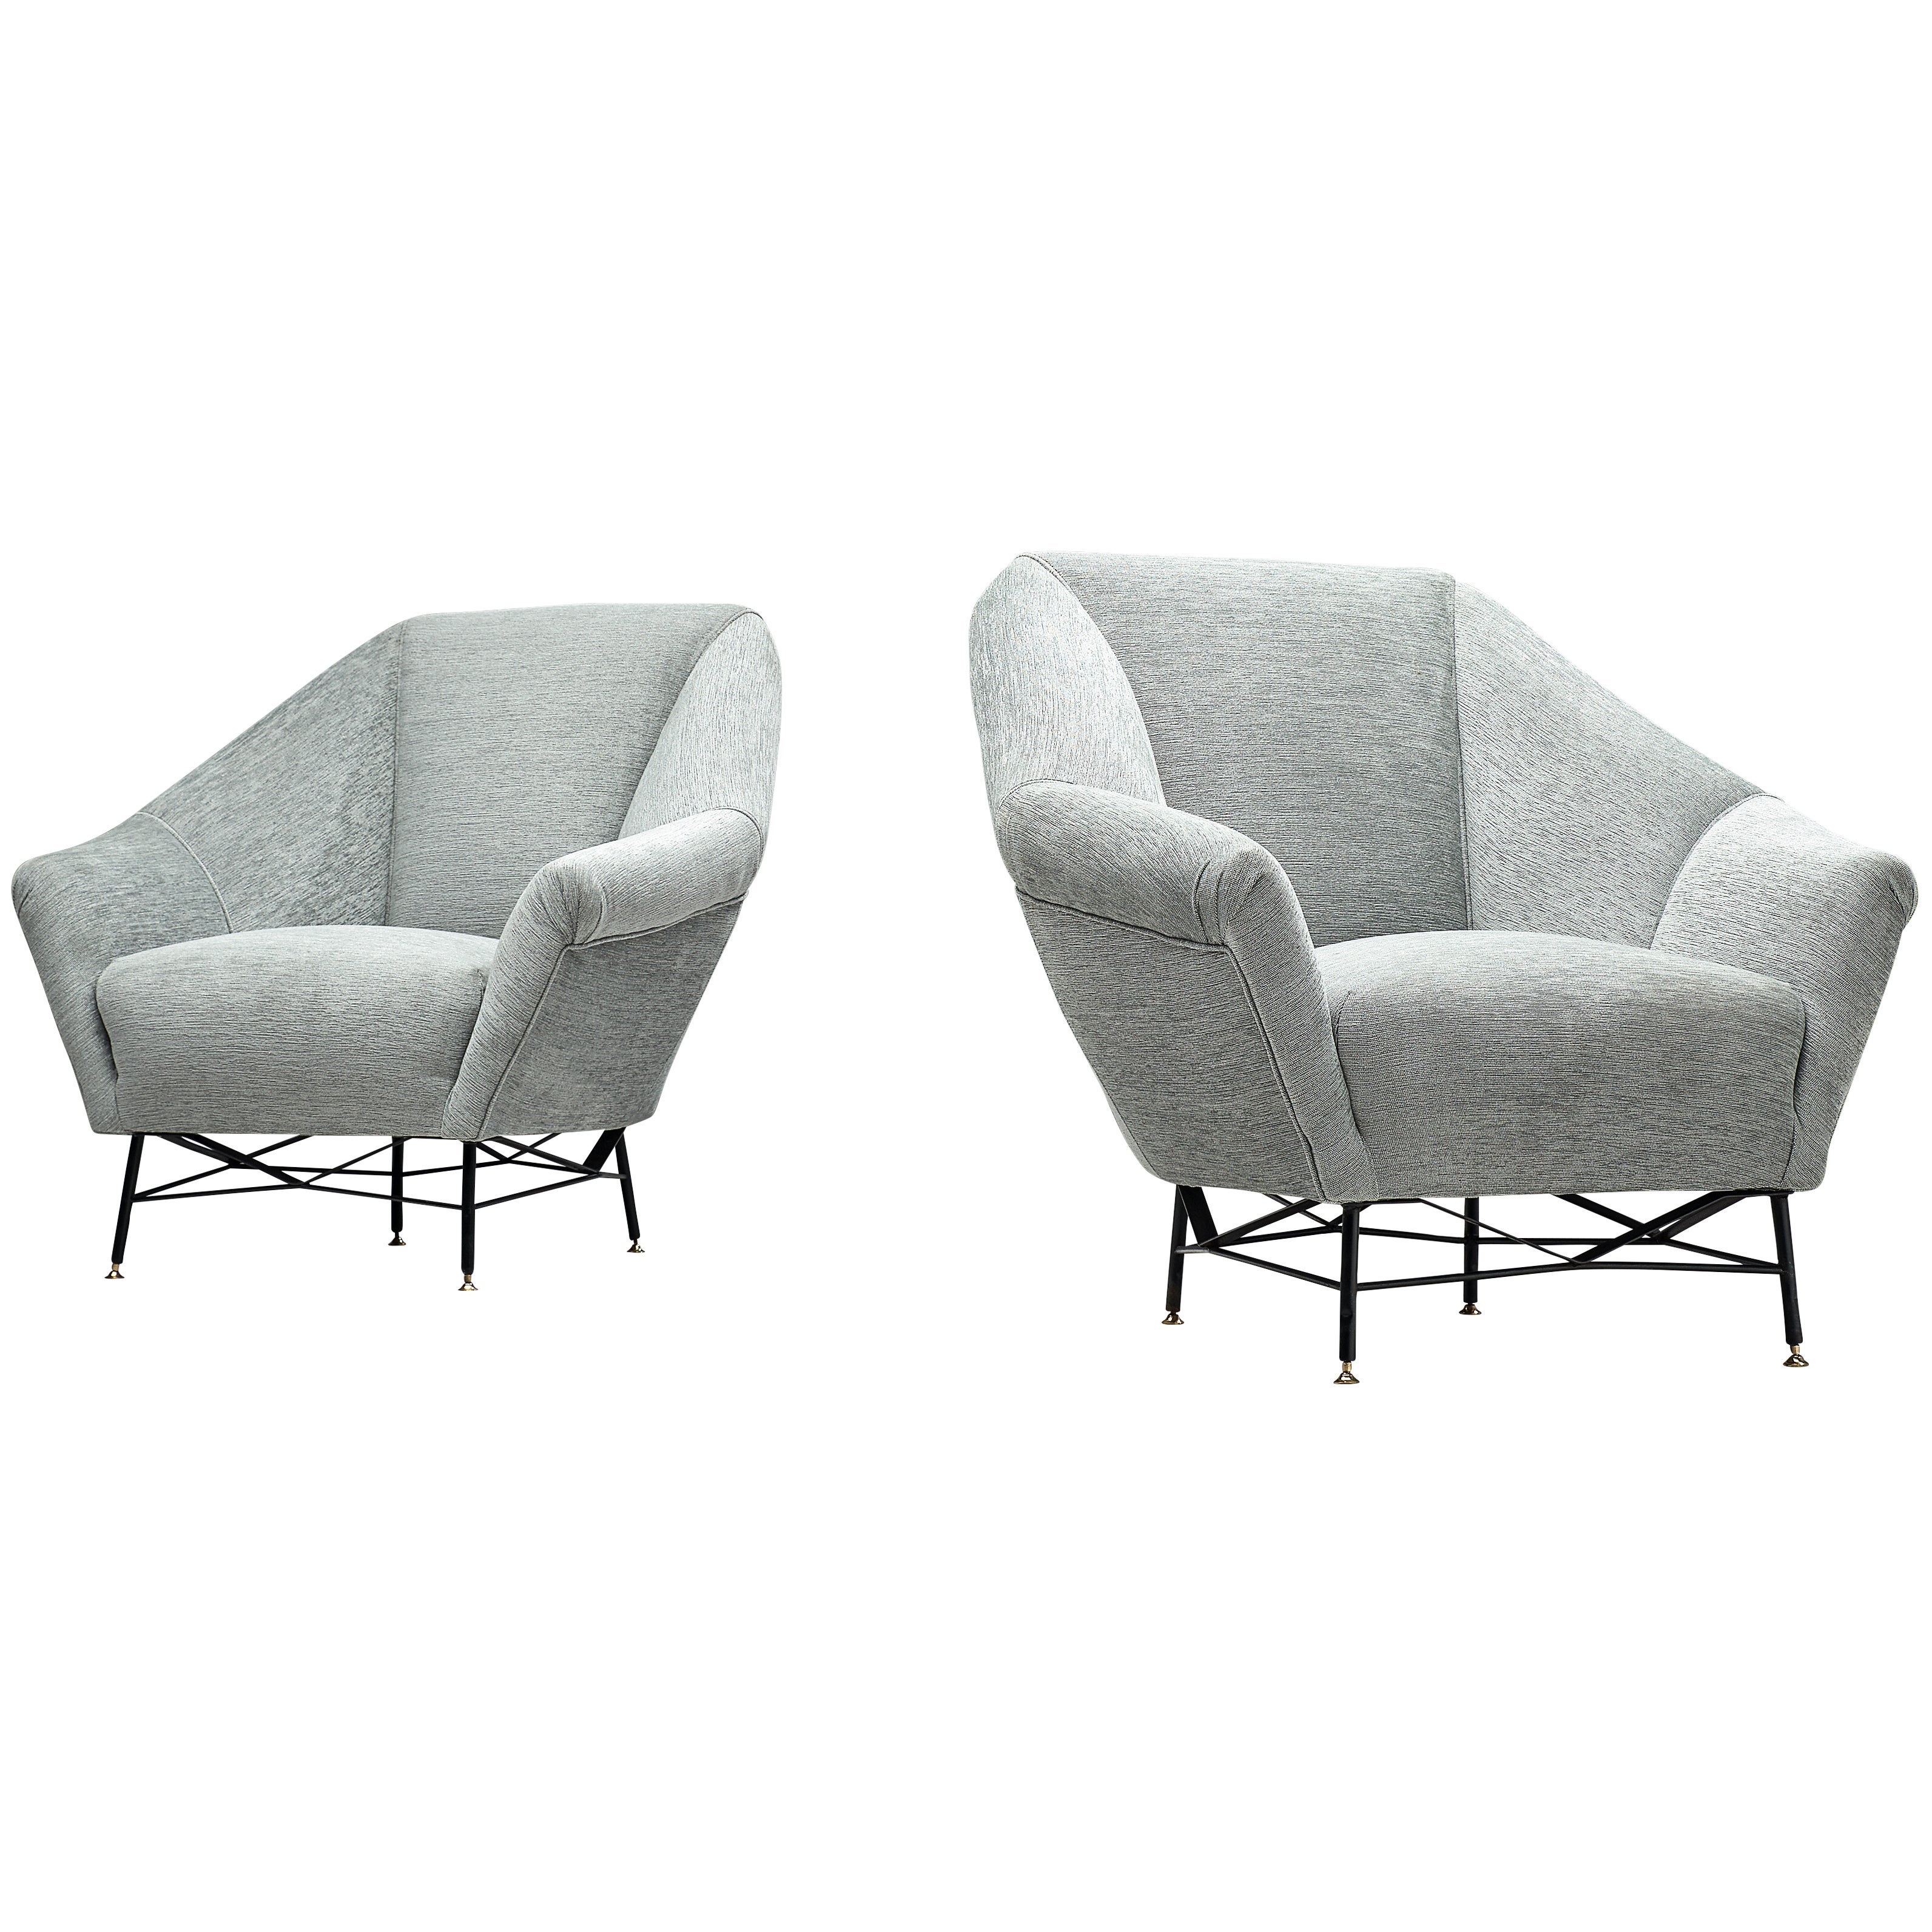 Pair of Italian Lounge Chair in Blue-Grey Fabric